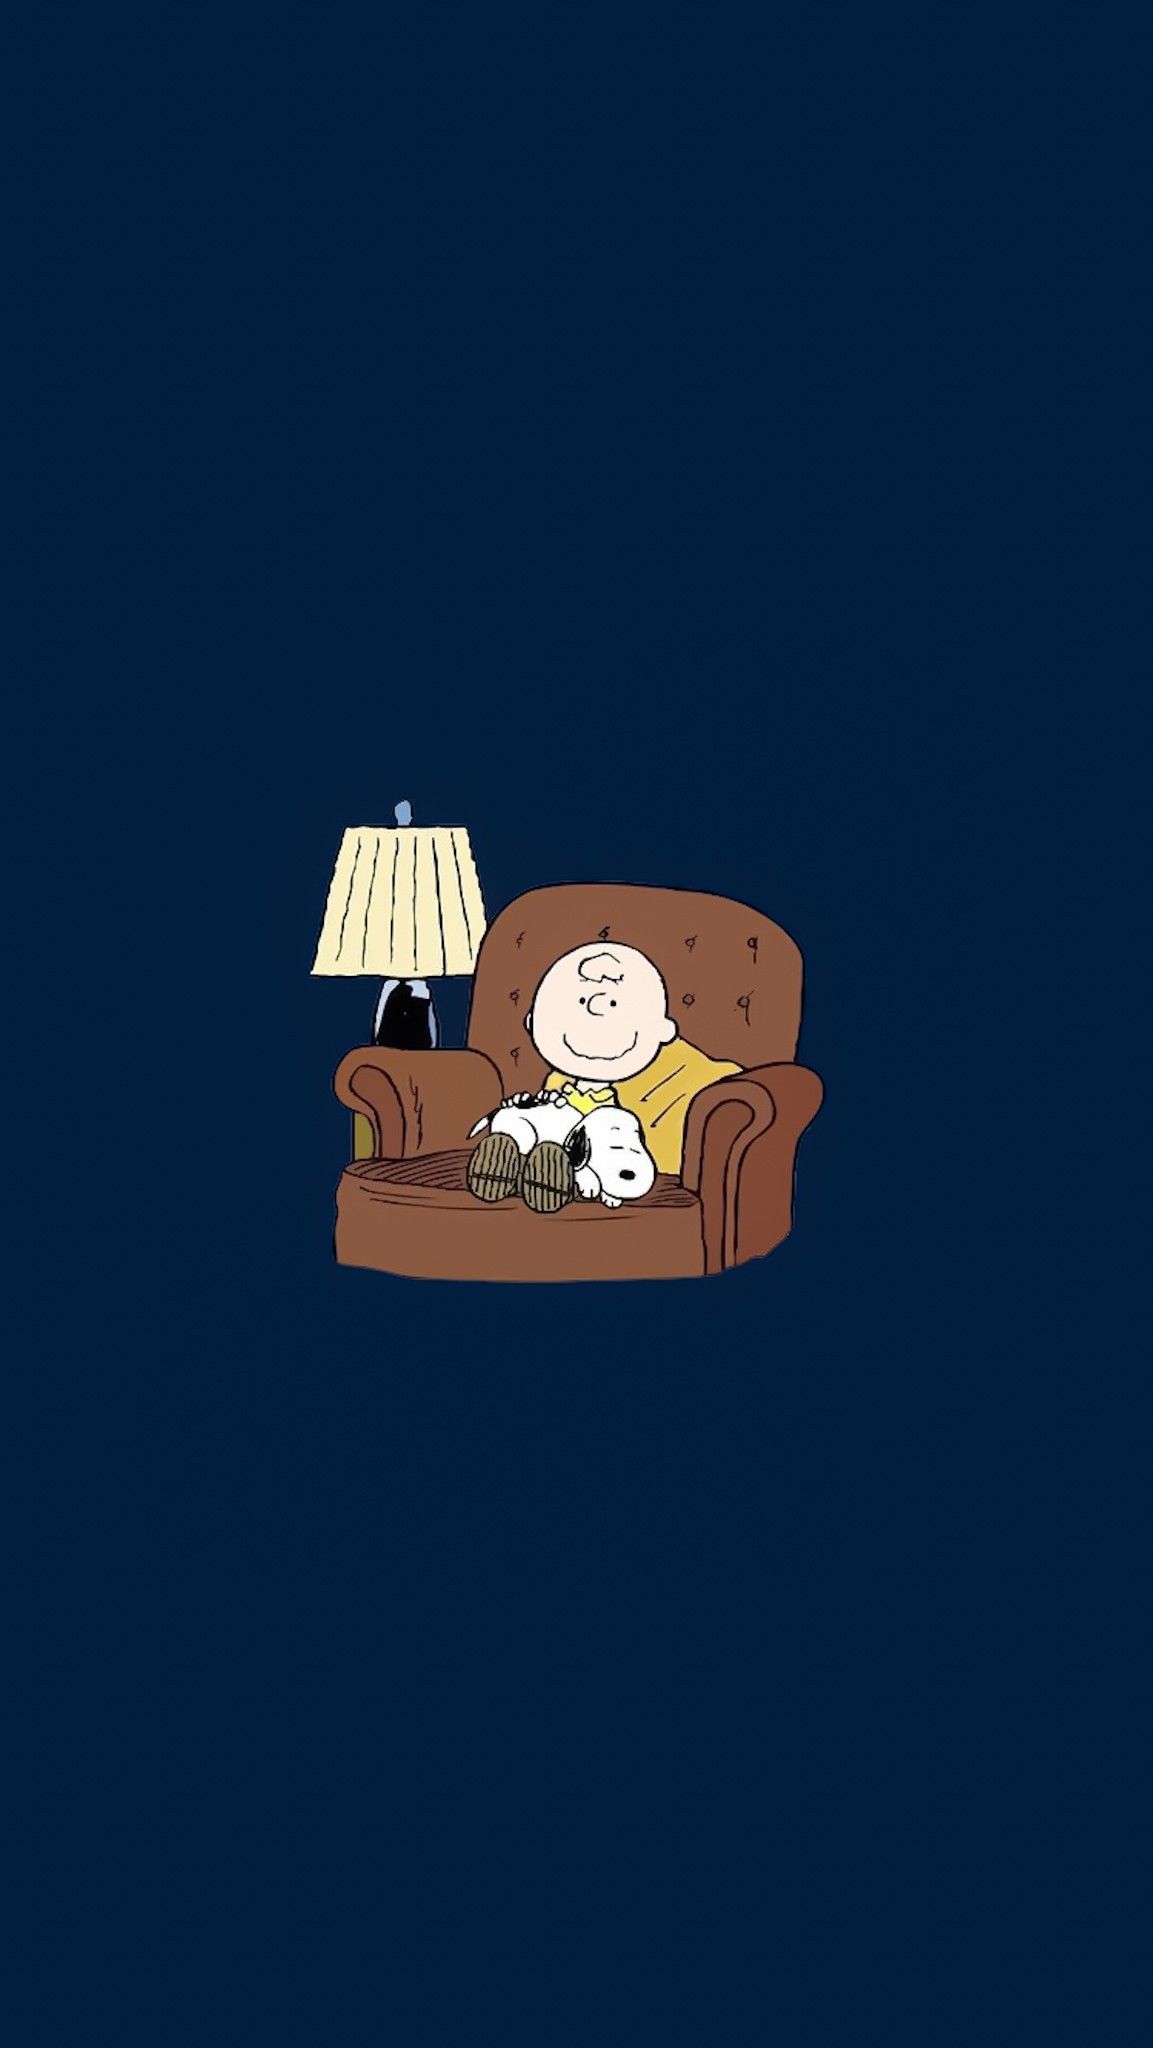 Charlie Brown sitting on a couch with a lamp on - Charlie Brown